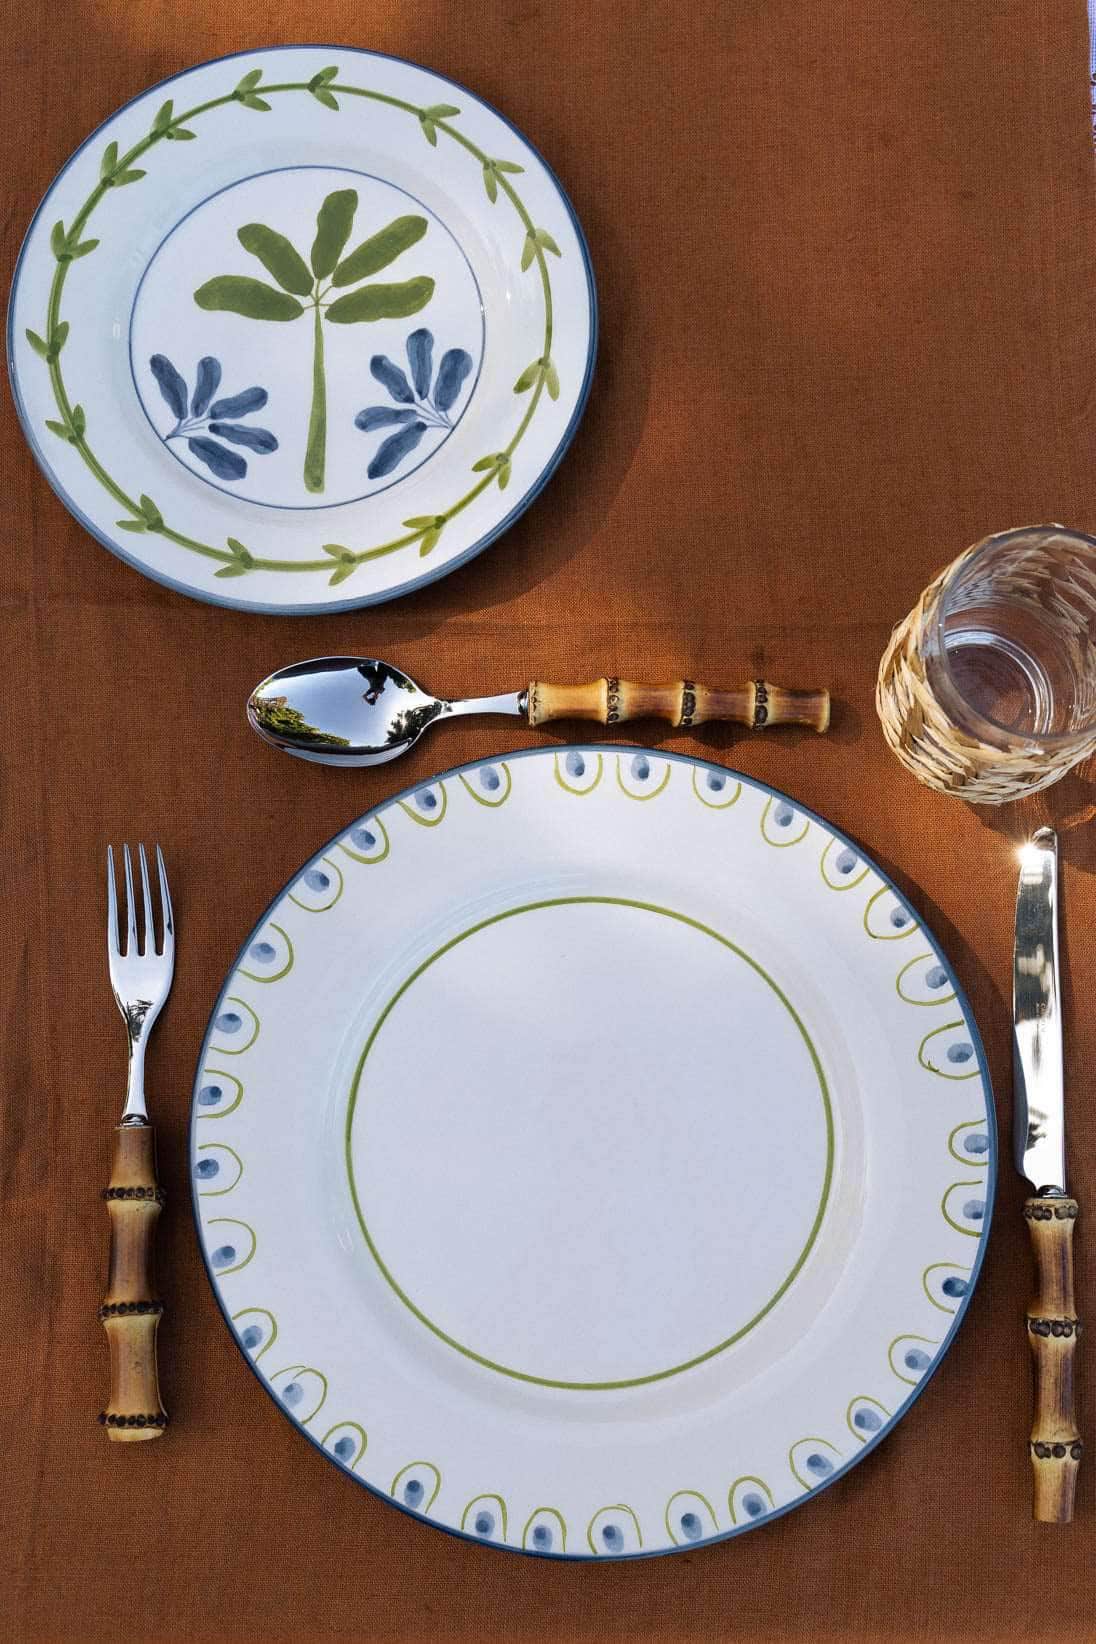 Bamboo Dinner Cutlery Set - 12 pieces